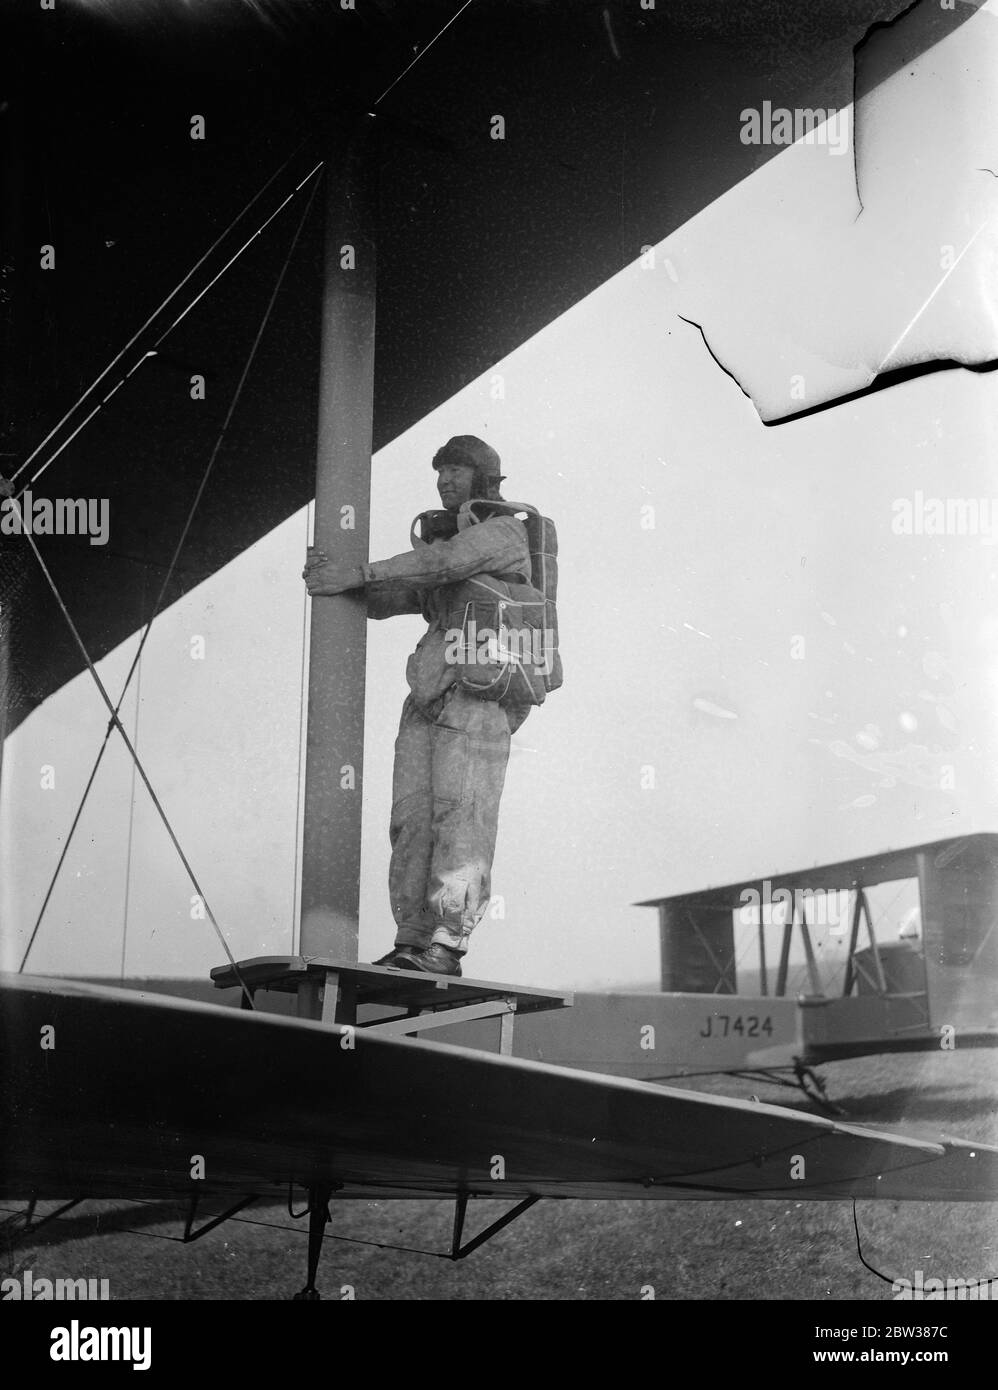 RAF parachute test section at work . A demonstration was given at the Royal Air Force parachute section at Henlow Aerodrome , Bedfordshire , of the work and training of parachutists . Testing parachutes is one of the items open to inspection by the public on Empire Air Day May 24 . Photo shows , a parachutist takes position on a jump platform holding onto the wing spar of a Vickers 'Virginia' parachute training aircraft . 10 May 1934 Stock Photo